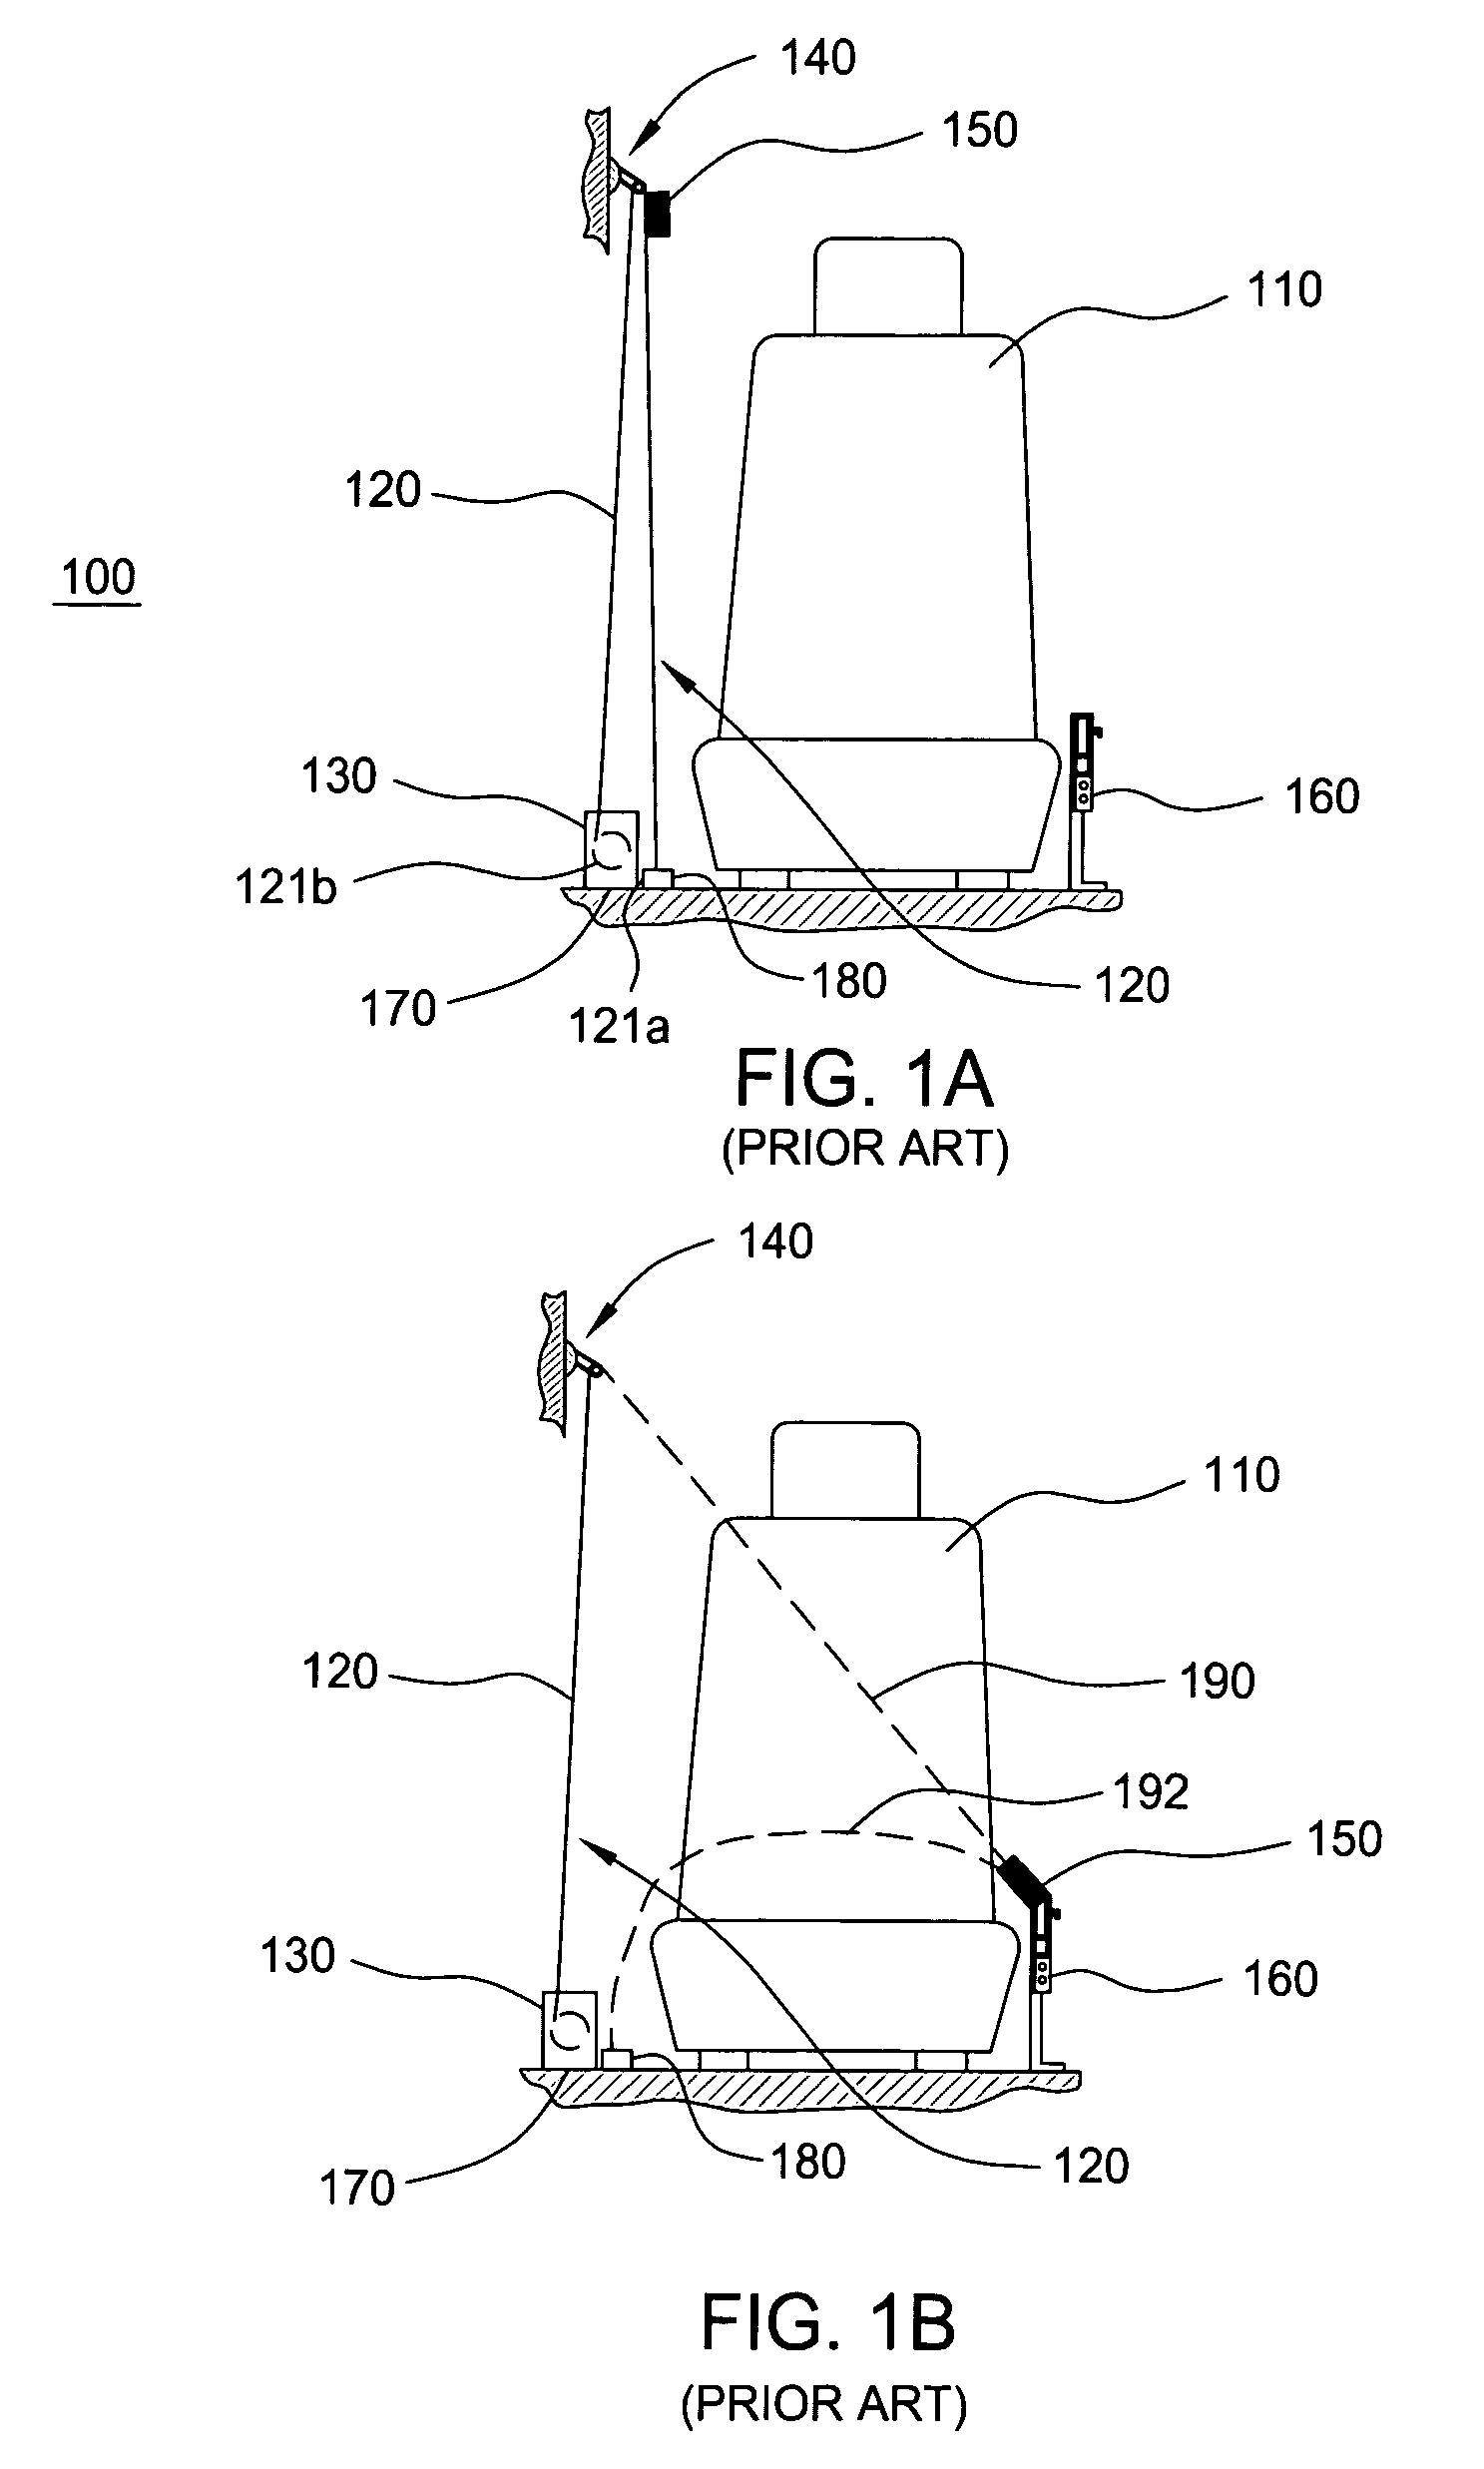 Method and apparatus for use on a safety belt system for restraining the movement of an occupant or child seat